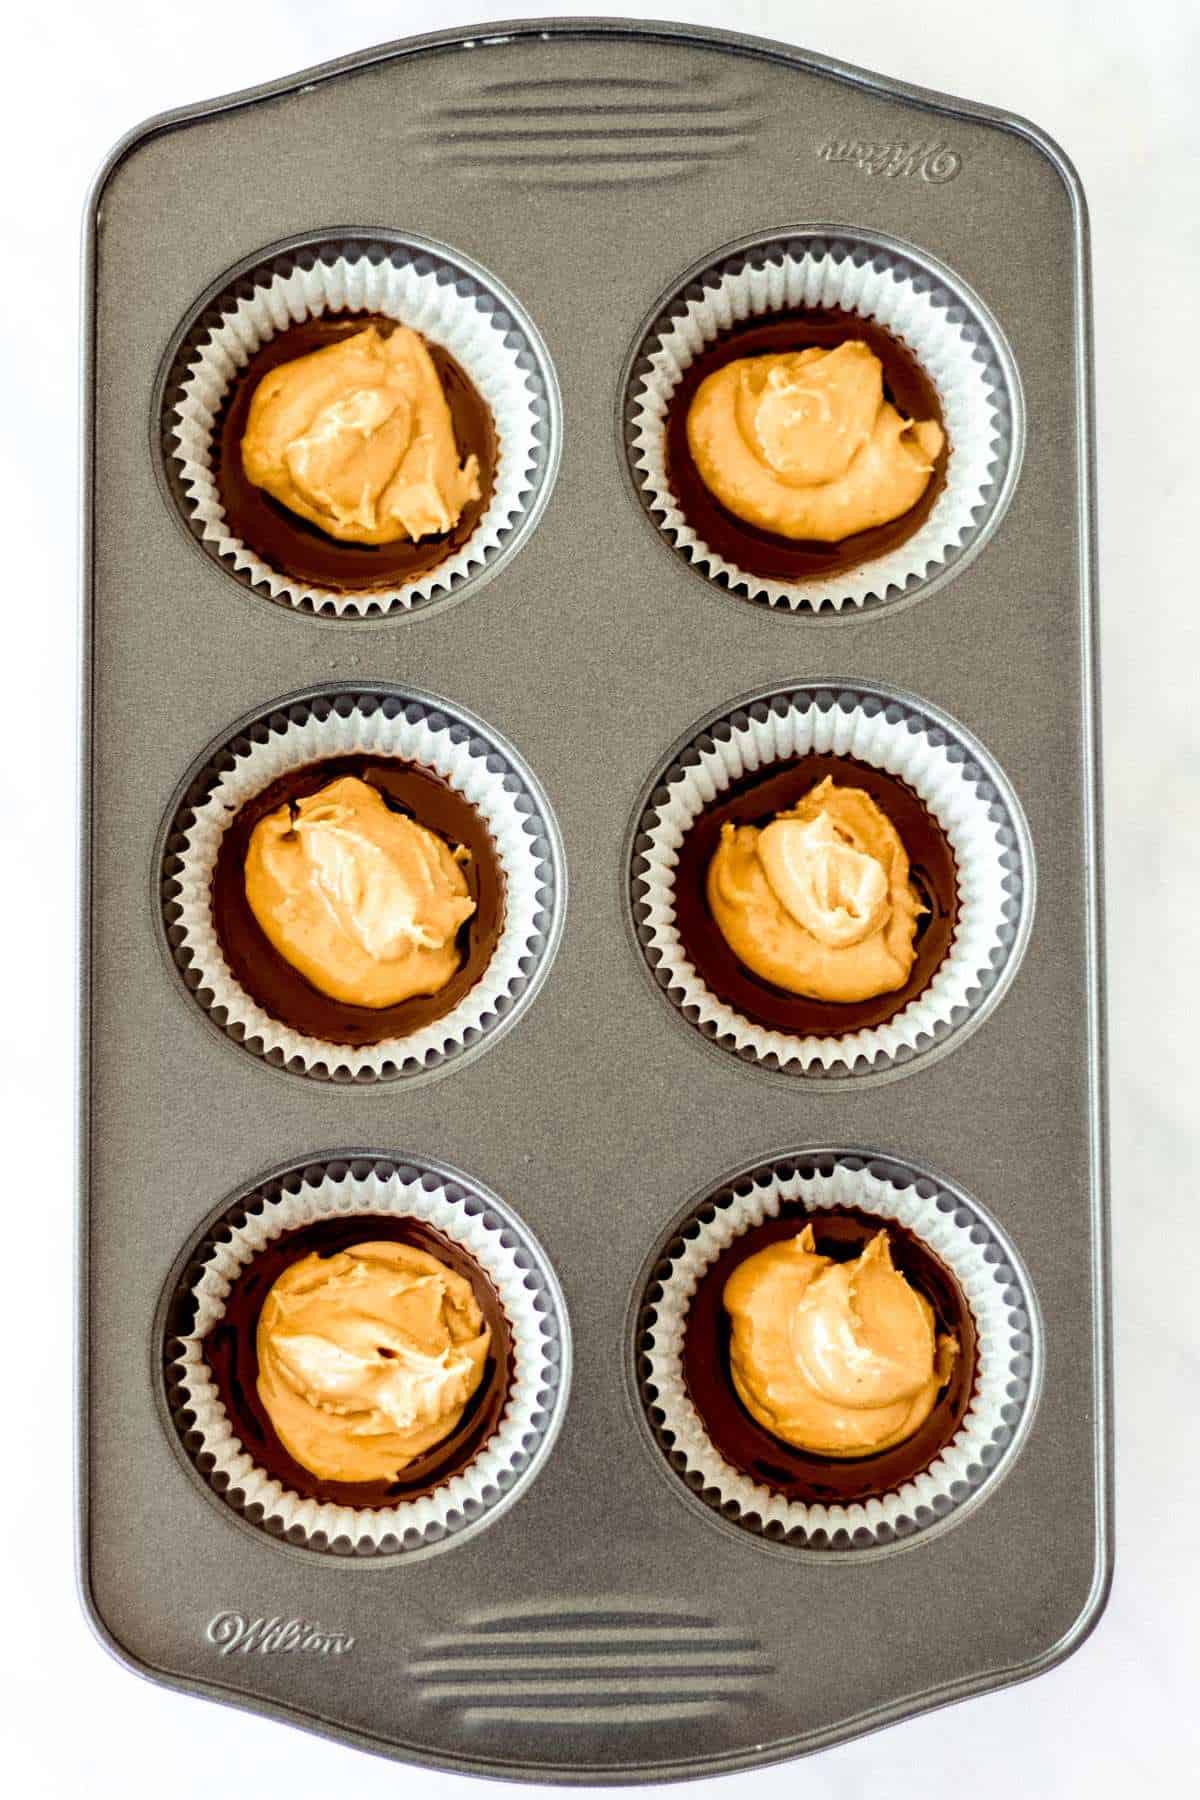 Peanut butter mixture on top of chocolate mixture in muffin tins. 